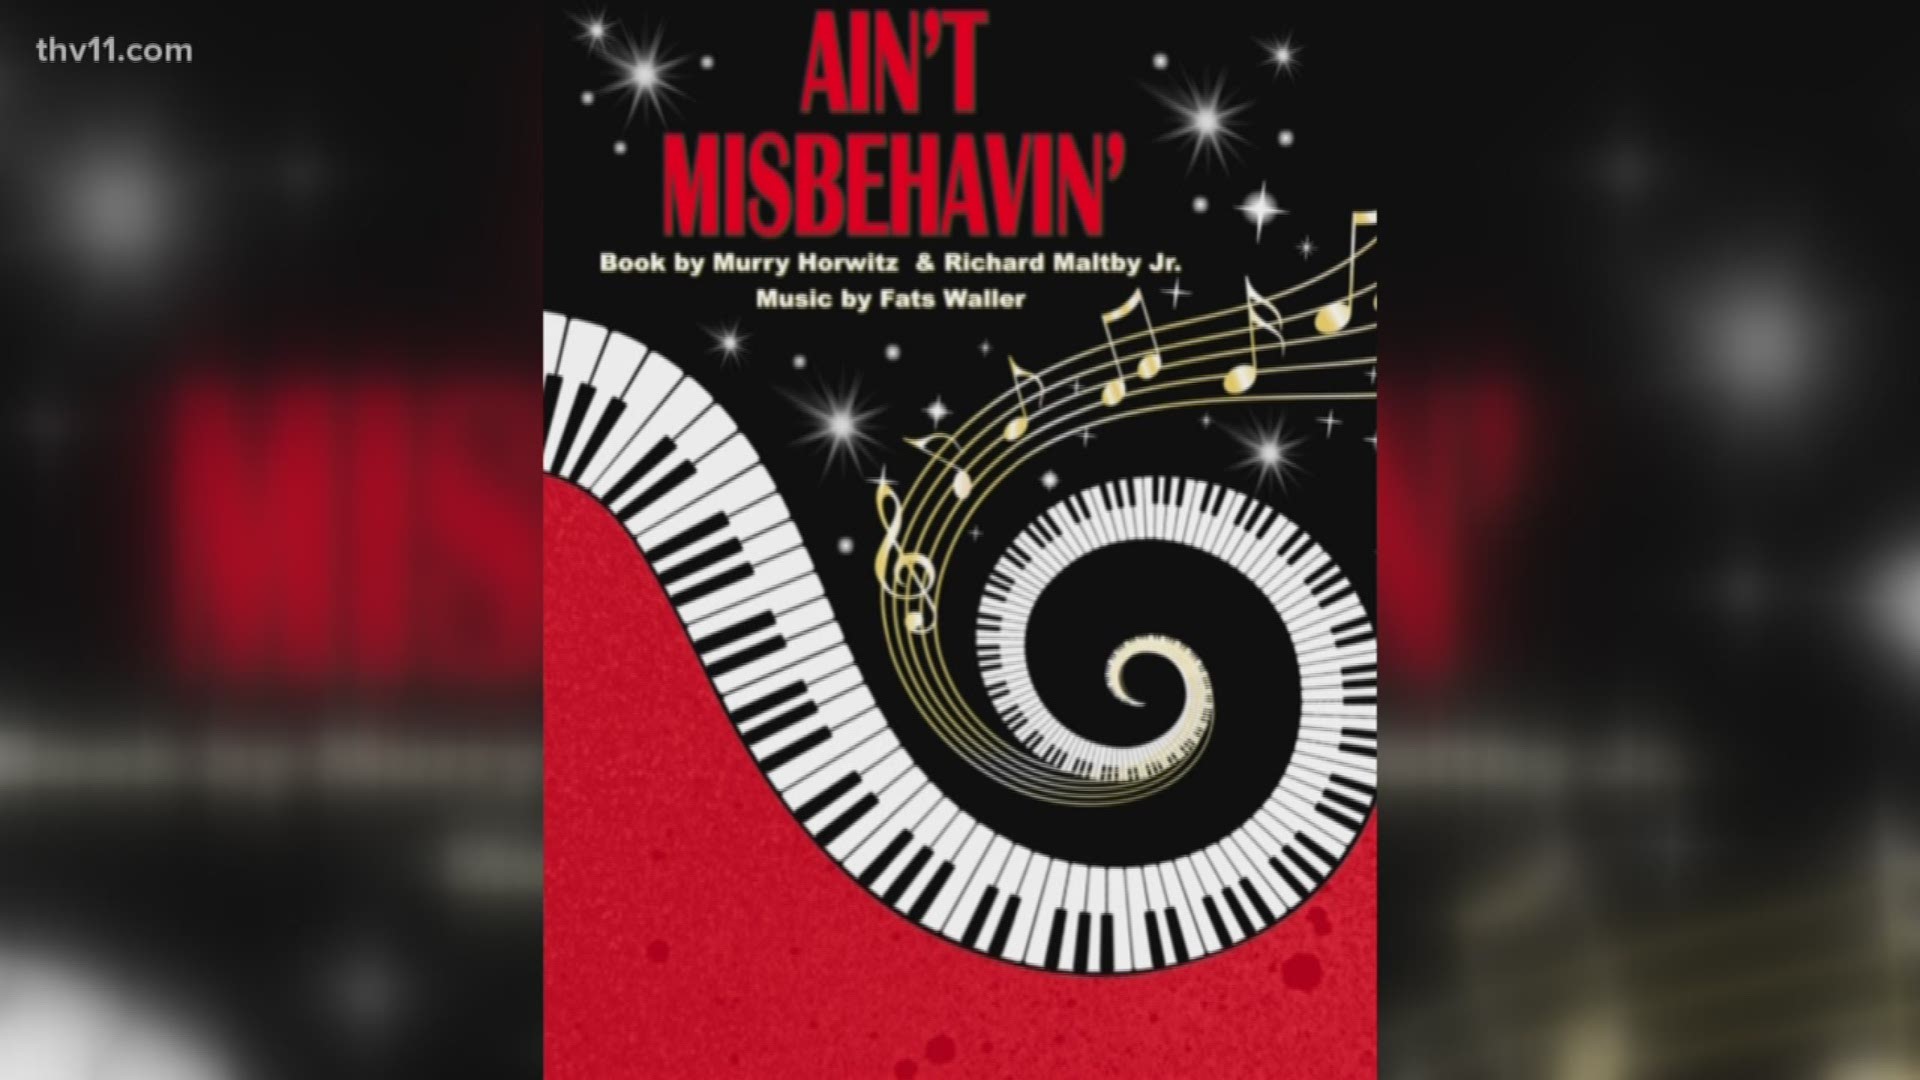 The Weekend Theater will stage “Ain’t Misbehavin: The Fats Waller Musical Show” Feb. 21- March 3 at the theater.